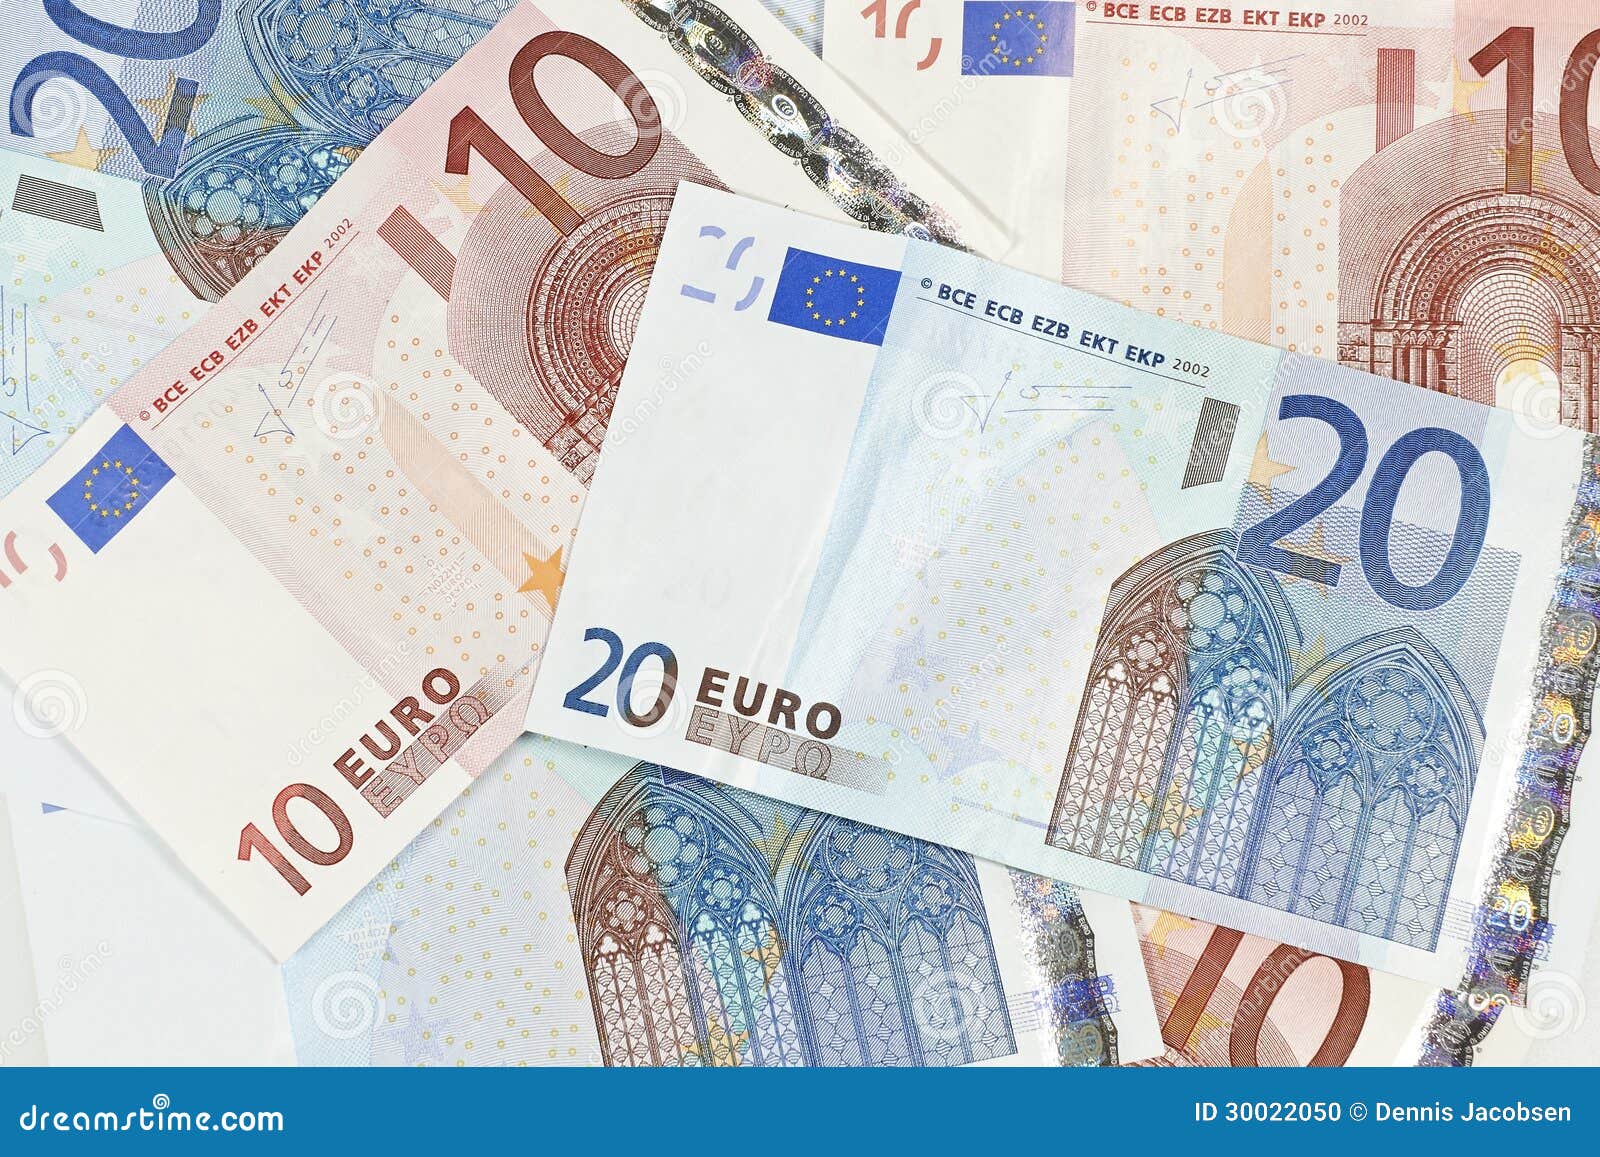 eurozone currency